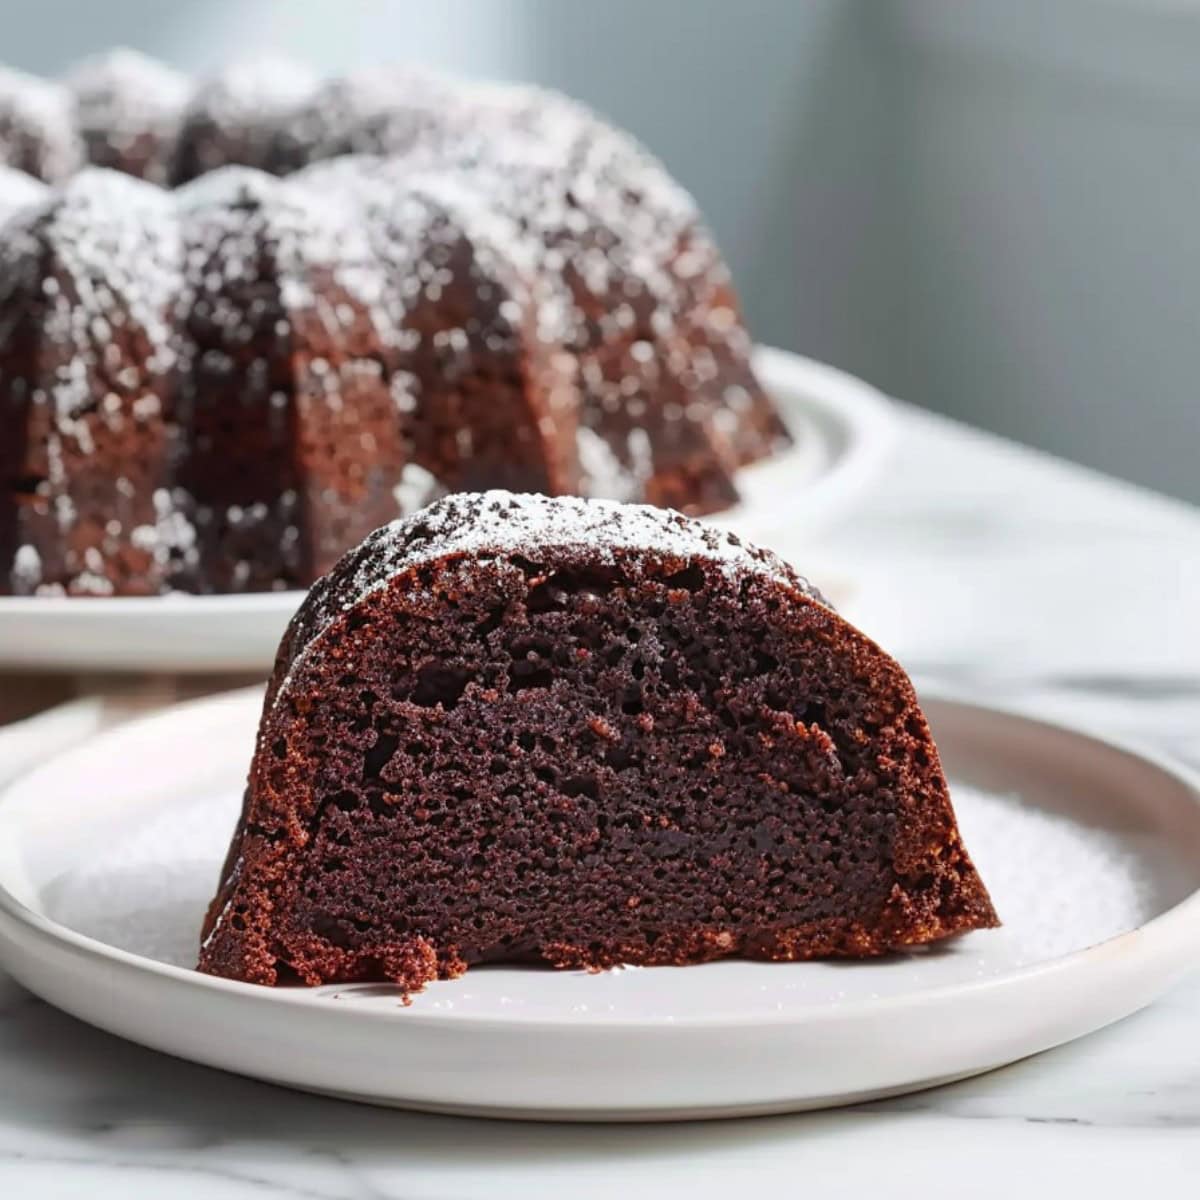 Slice of Too Much Chocolate Cake on a White Plate with the Rest of the Bundt in the Background